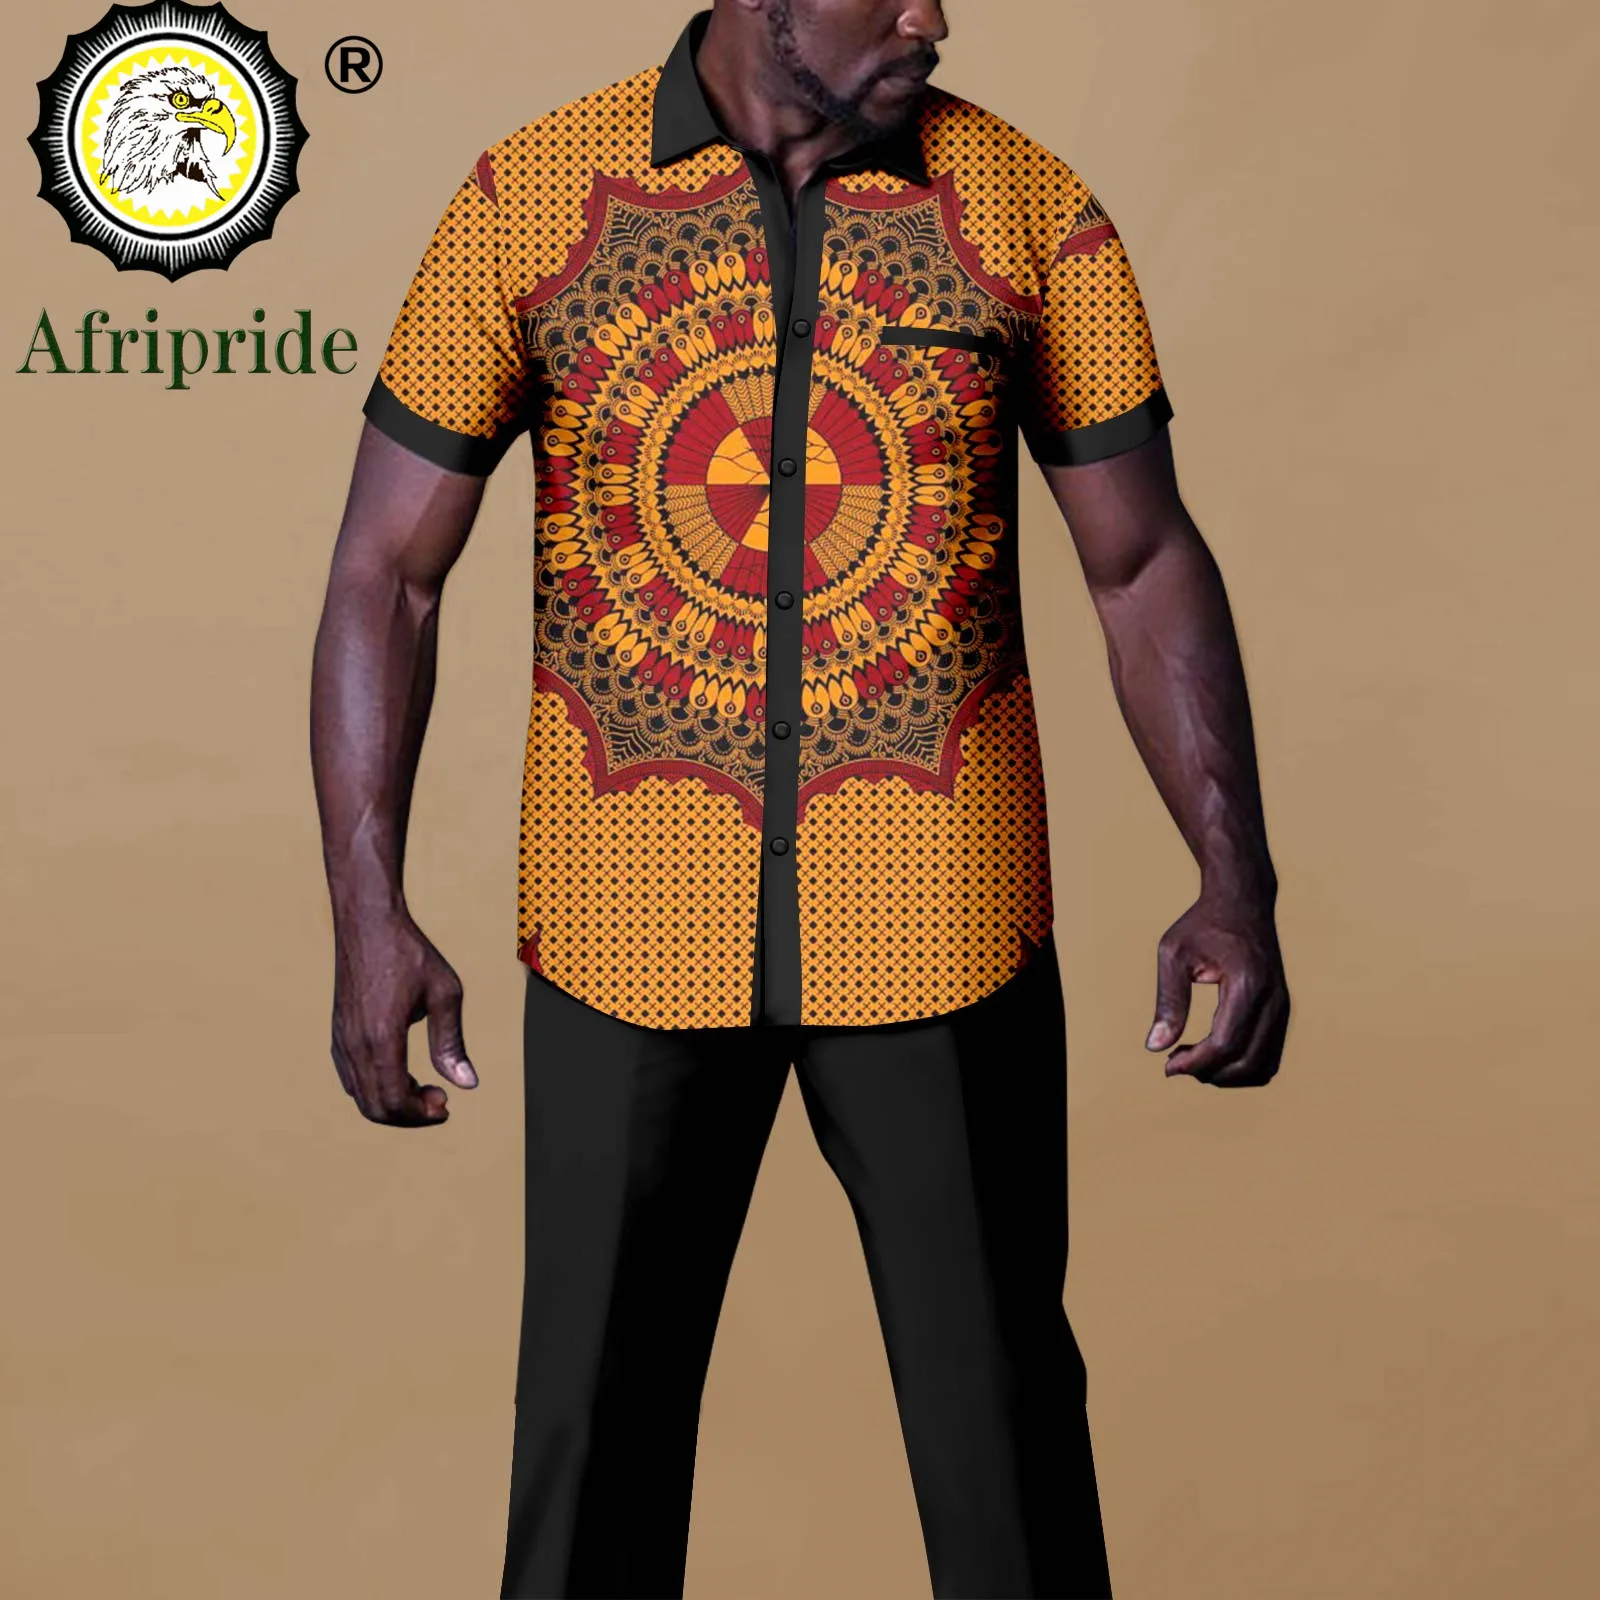 2023 dashiki men tracksuit 2 piece african shirts and ankara pants suits plus size outwear clothes wear afripride a1916057 African Outfits for Men Tracksuit Short Sleeve Print Shirts and Pants Set Dashiki Outfits Plus Size Casual Sweatsuits A2216089